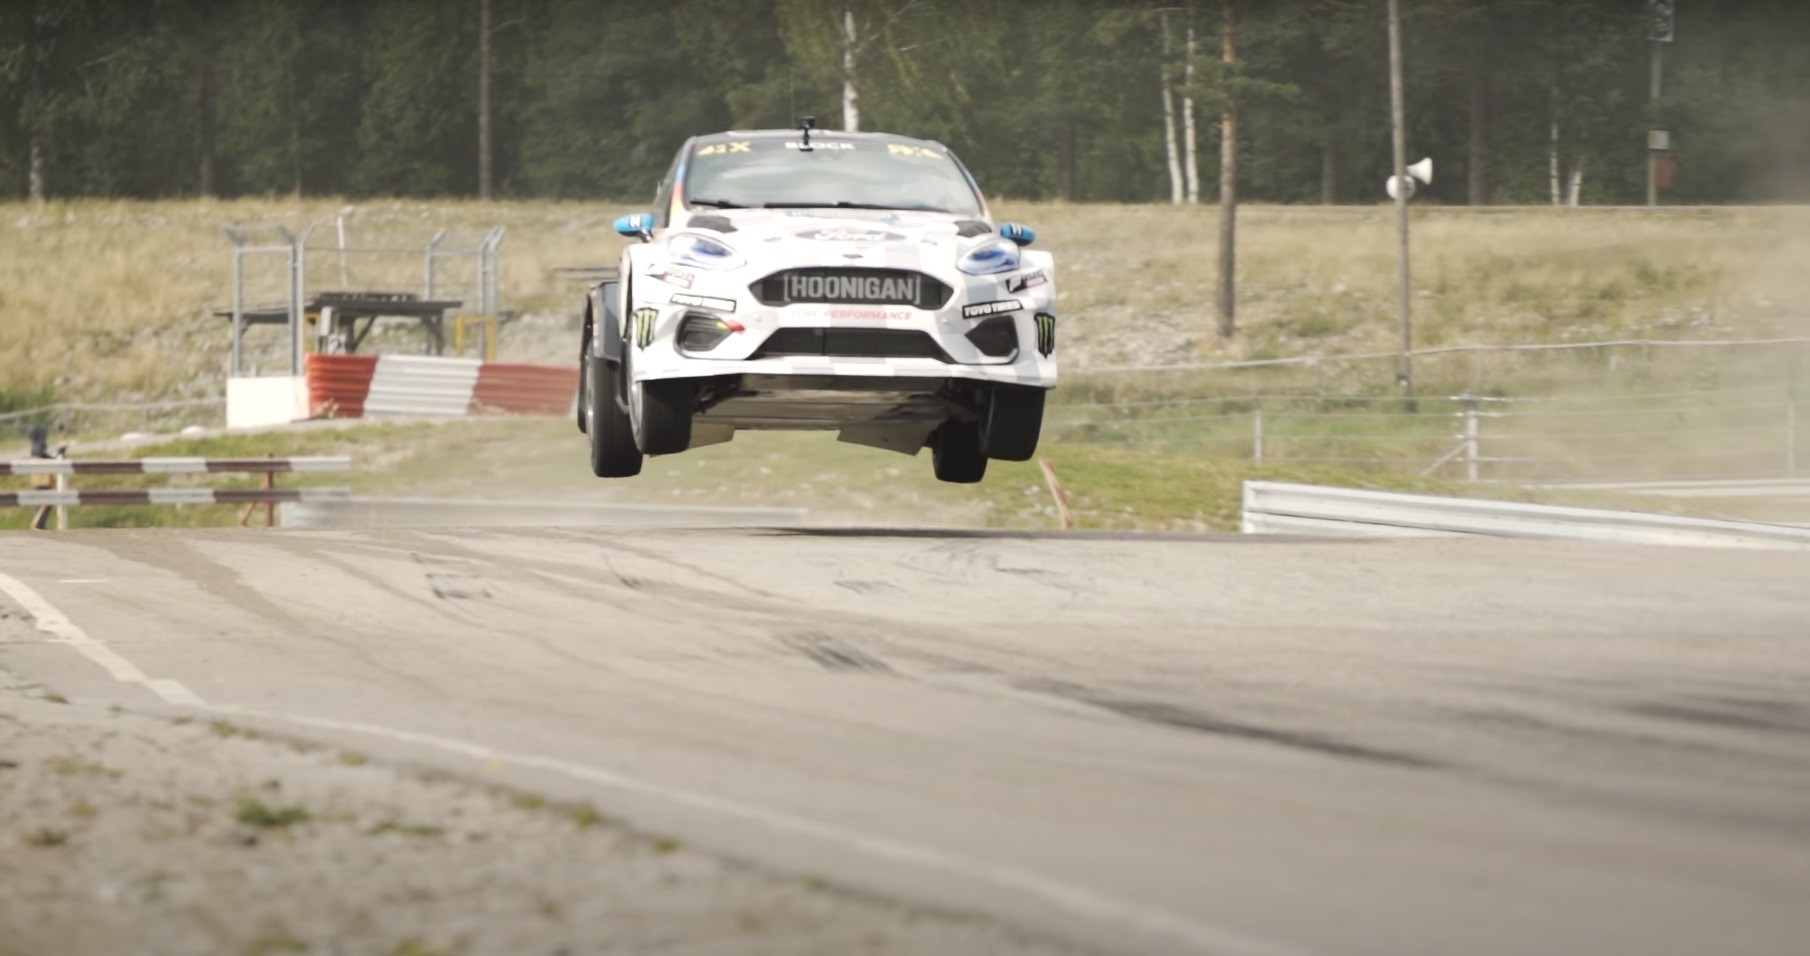 Watch Ken Block Hoon A 1 8 Seconds 0 60 Electric Ford Fiesta With 600 Hp Autoevolution